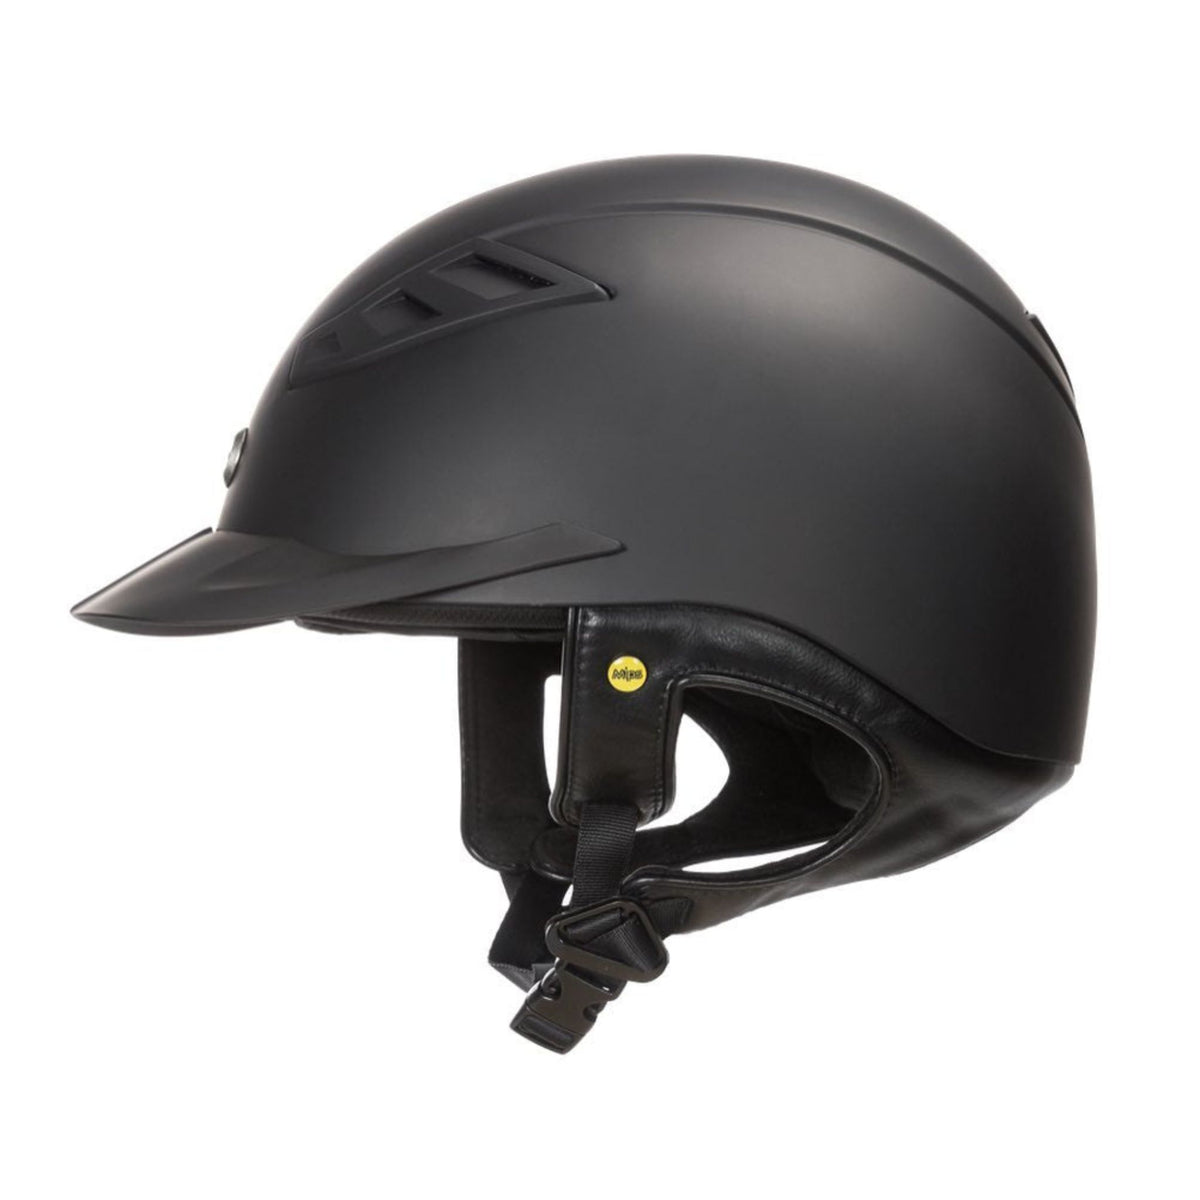 Black helmet with a smooth top and leather ear straps.